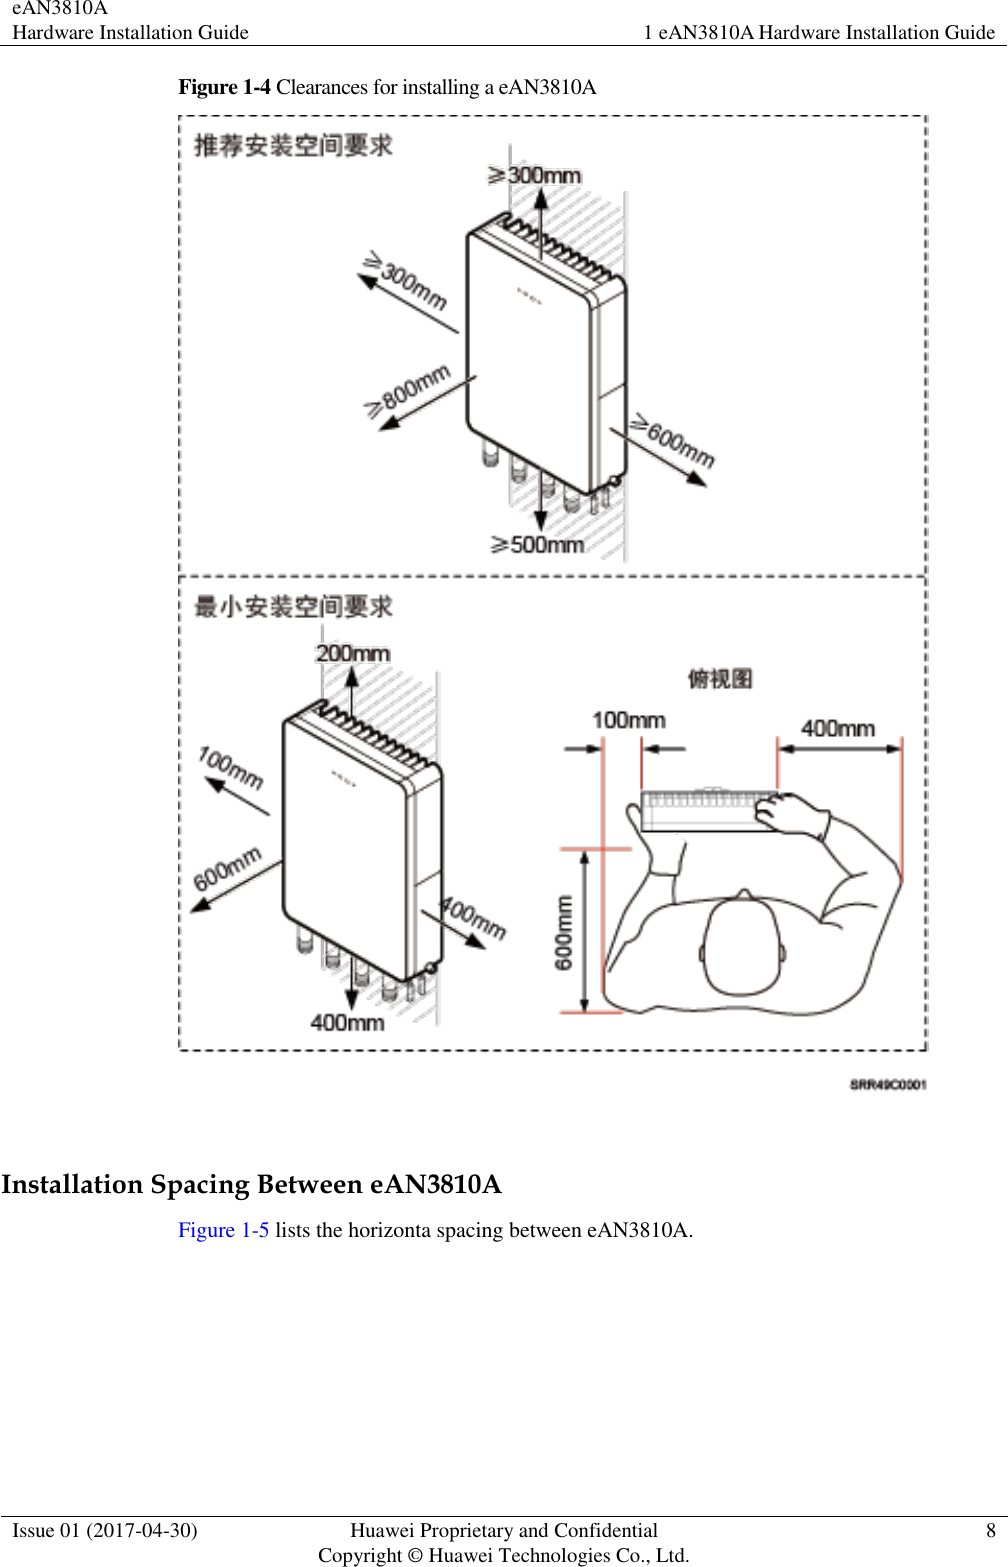 eAN3810A   Hardware Installation Guide 1 eAN3810A Hardware Installation Guide  Issue 01 (2017-04-30) Huawei Proprietary and Confidential                                     Copyright © Huawei Technologies Co., Ltd. 8  Figure 1-4 Clearances for installing a eAN3810A   Installation Spacing Between eAN3810A Figure 1-5 lists the horizonta spacing between eAN3810A. 